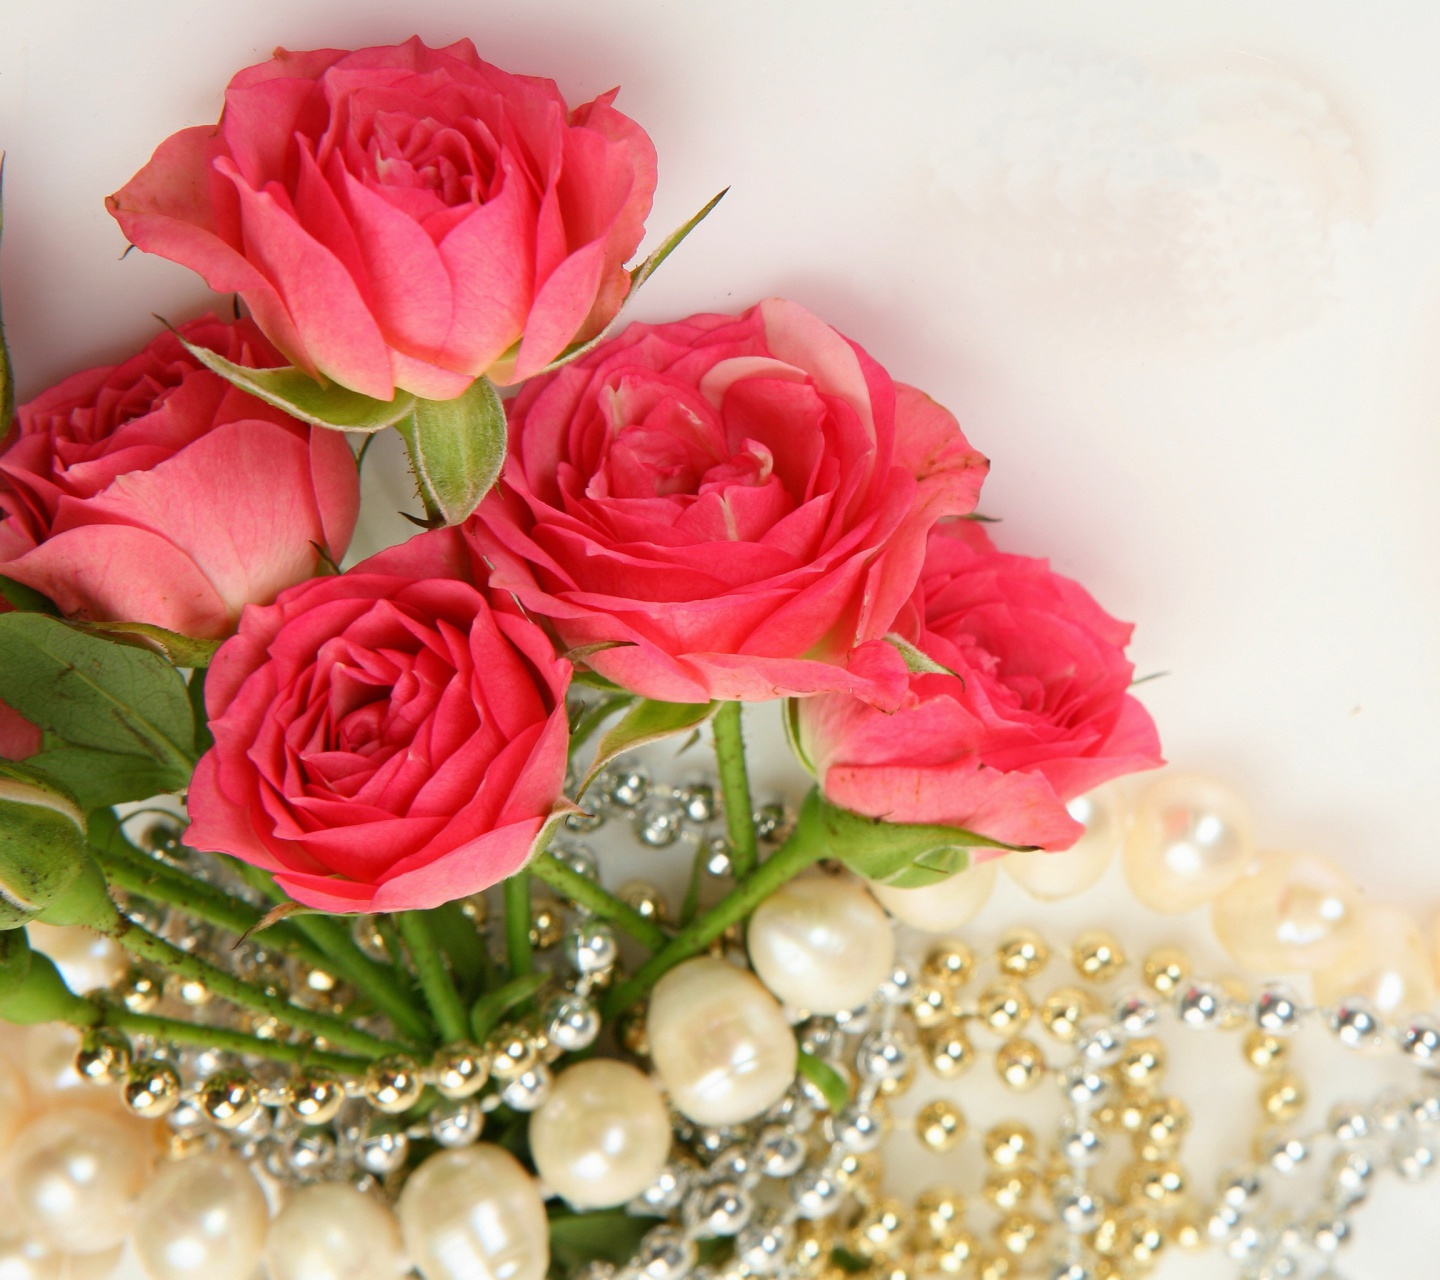 Necklace and Roses Bouquet screenshot #1 1440x1280